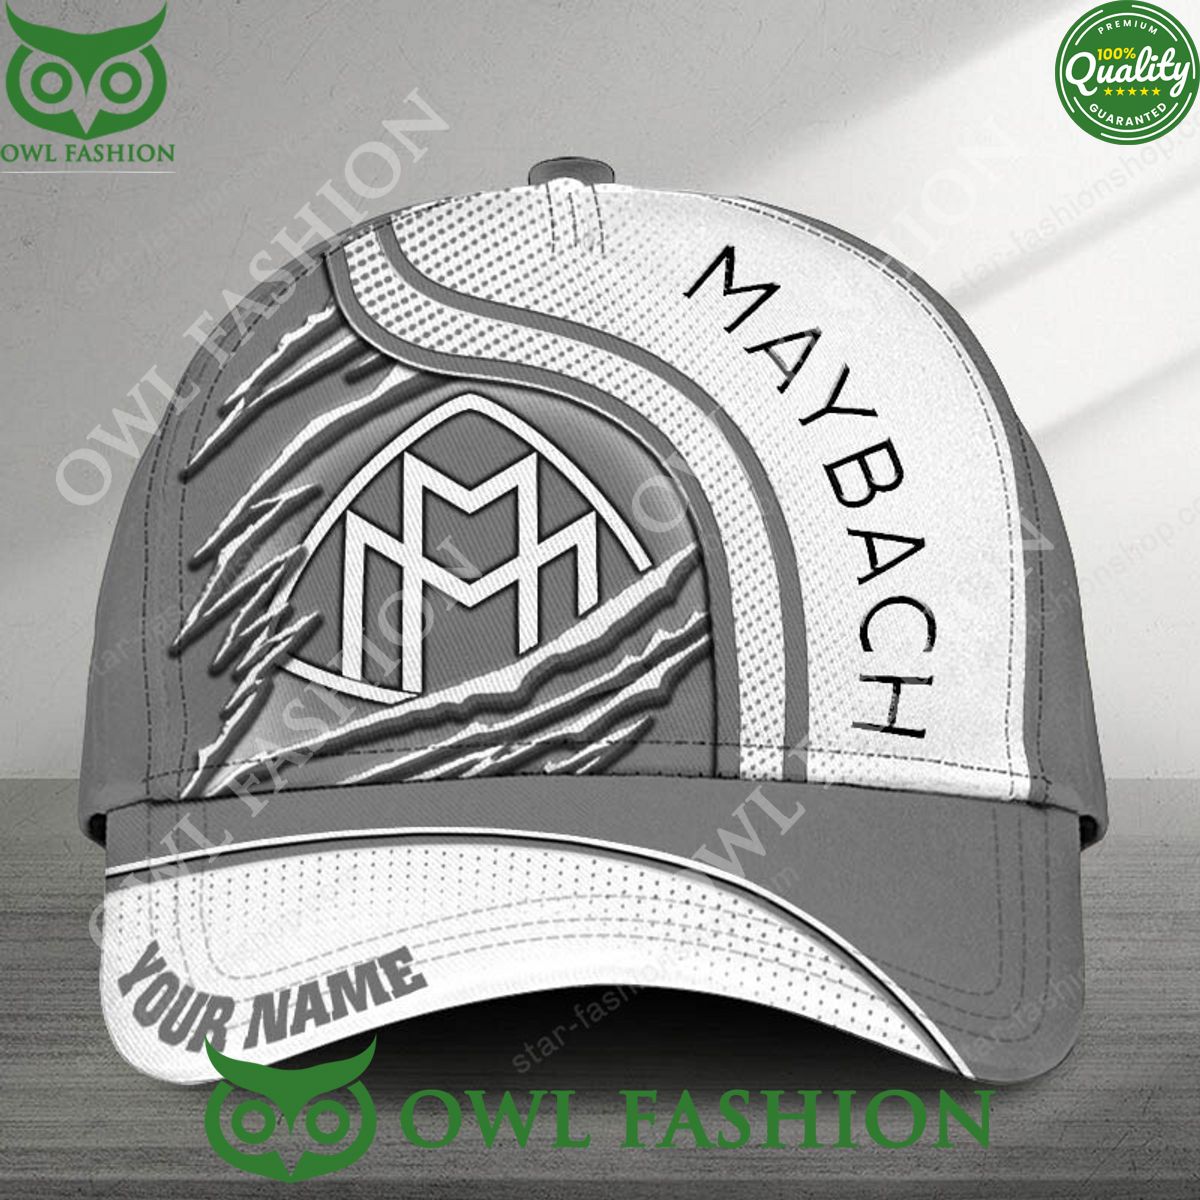 customized maybach limited edition car scratches printed cap 1 eSySE.jpg